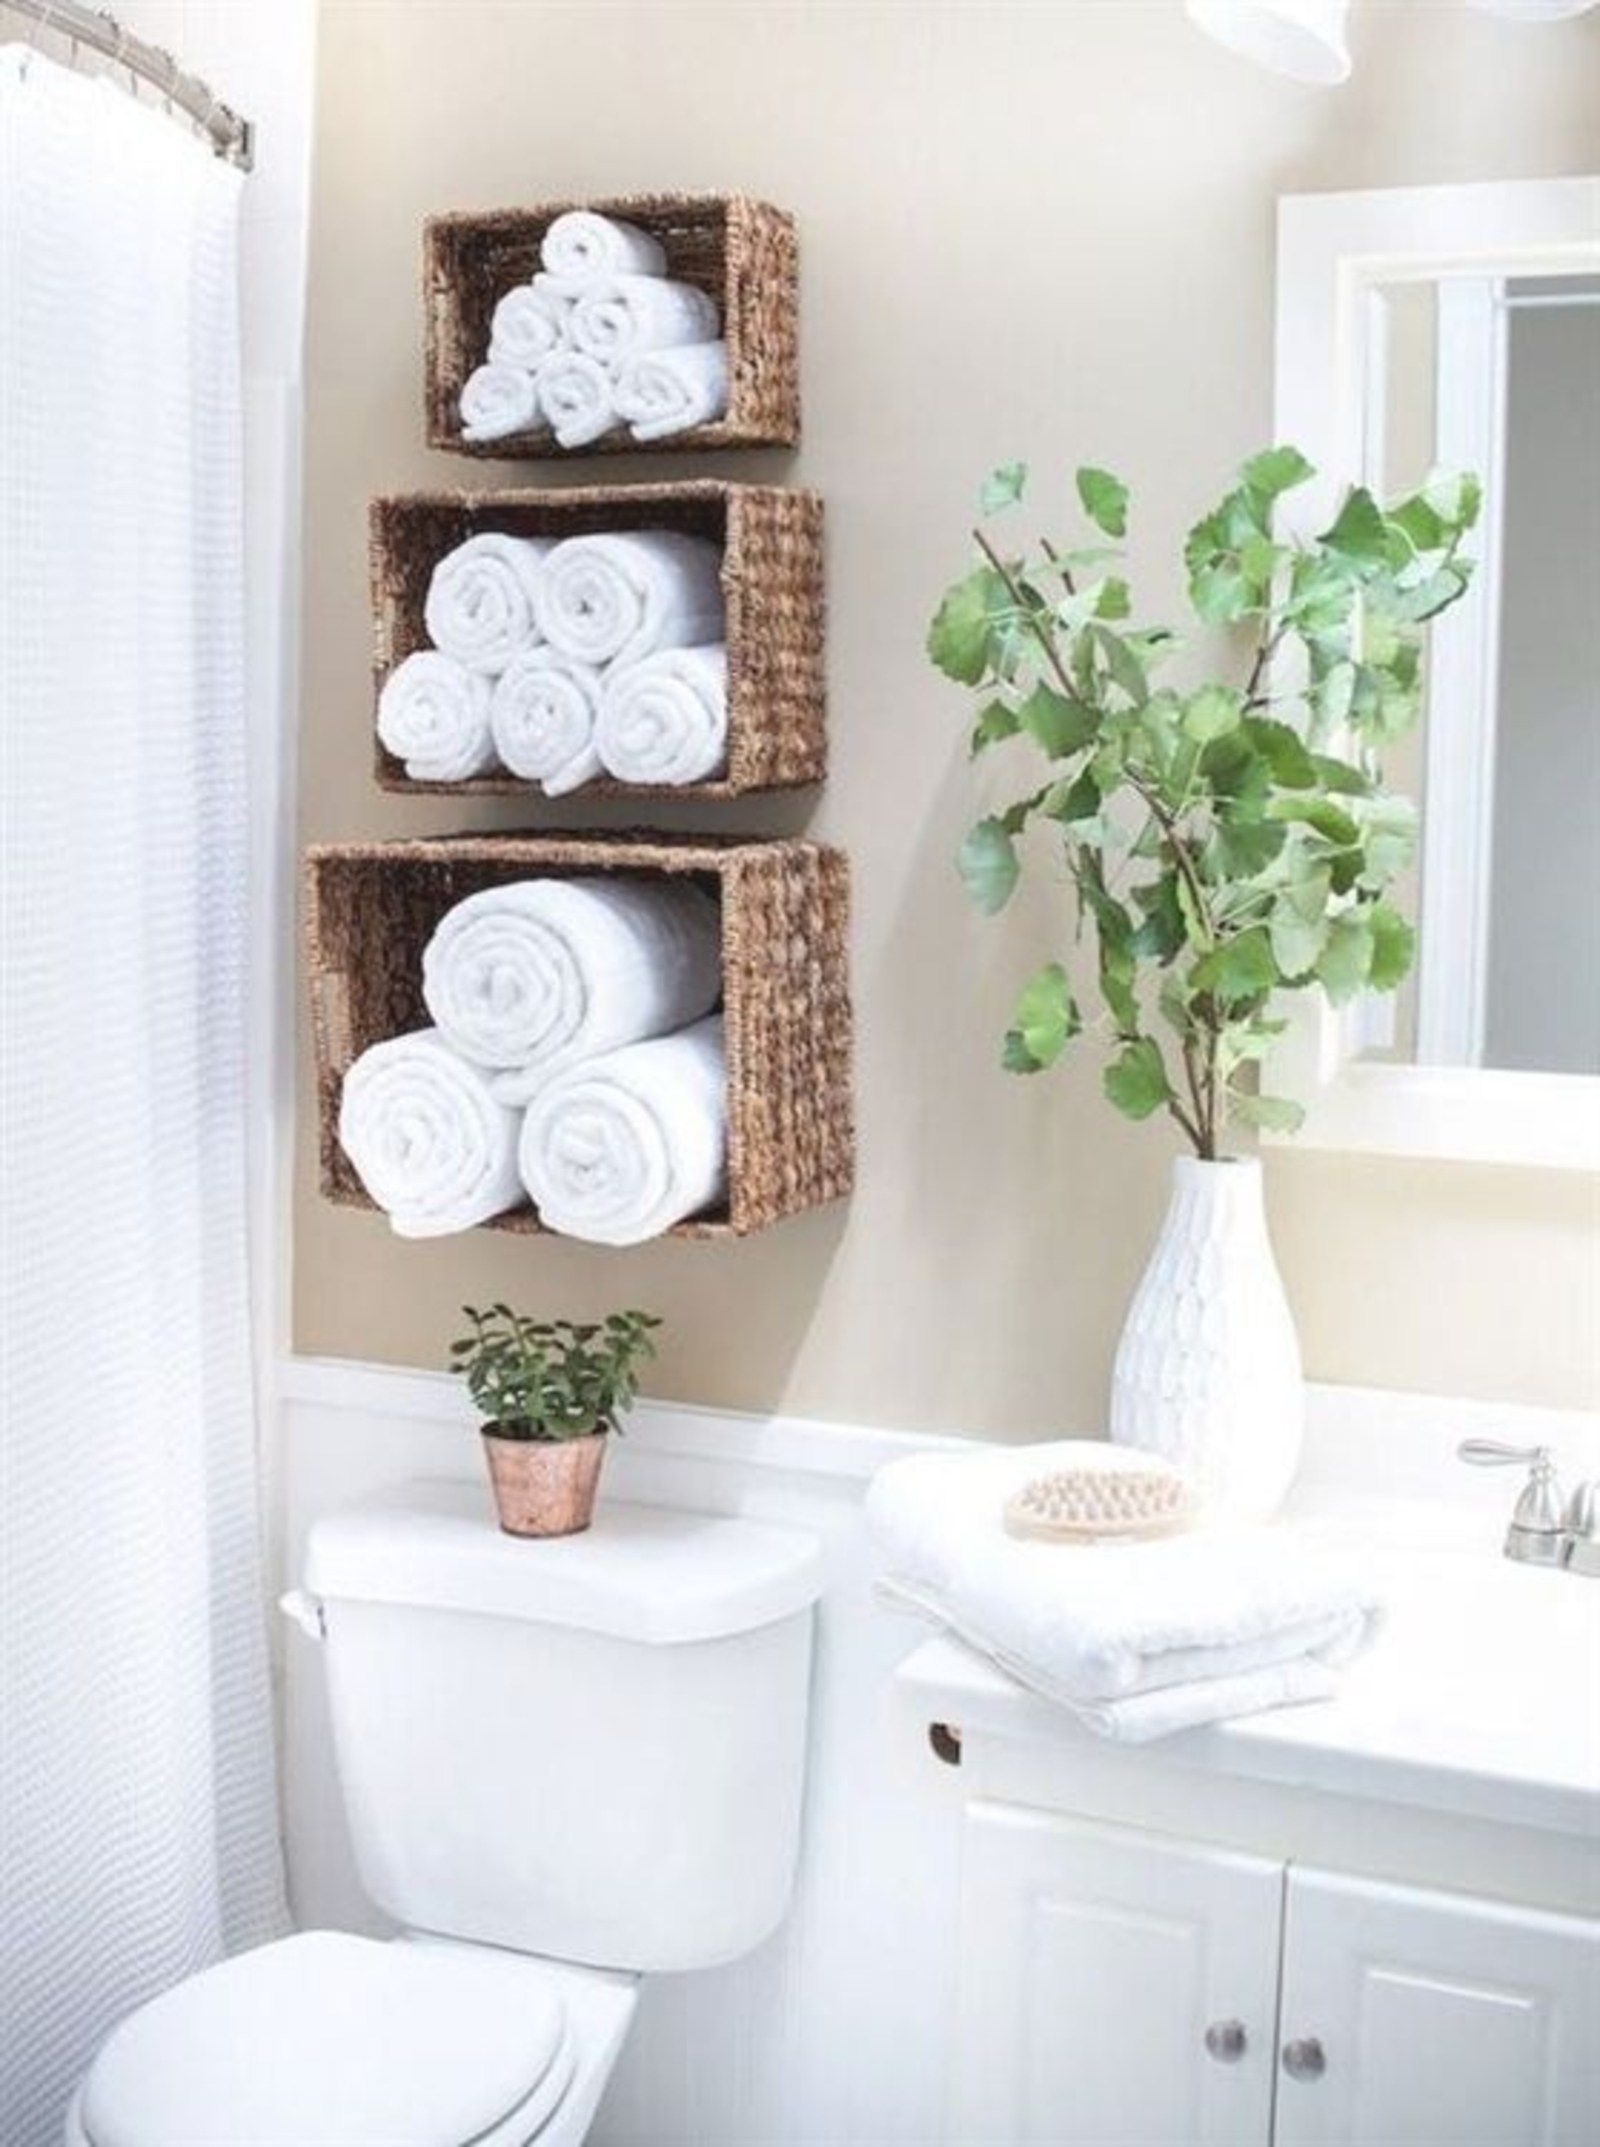 IDEAS PARA DECORAR UN BAÑO PEQUEÑO Many-people-often-overlooked-vanity-cabinets-when-they-decorate-cef4a9e50c7b16fead029318cd68532aa-1596712840